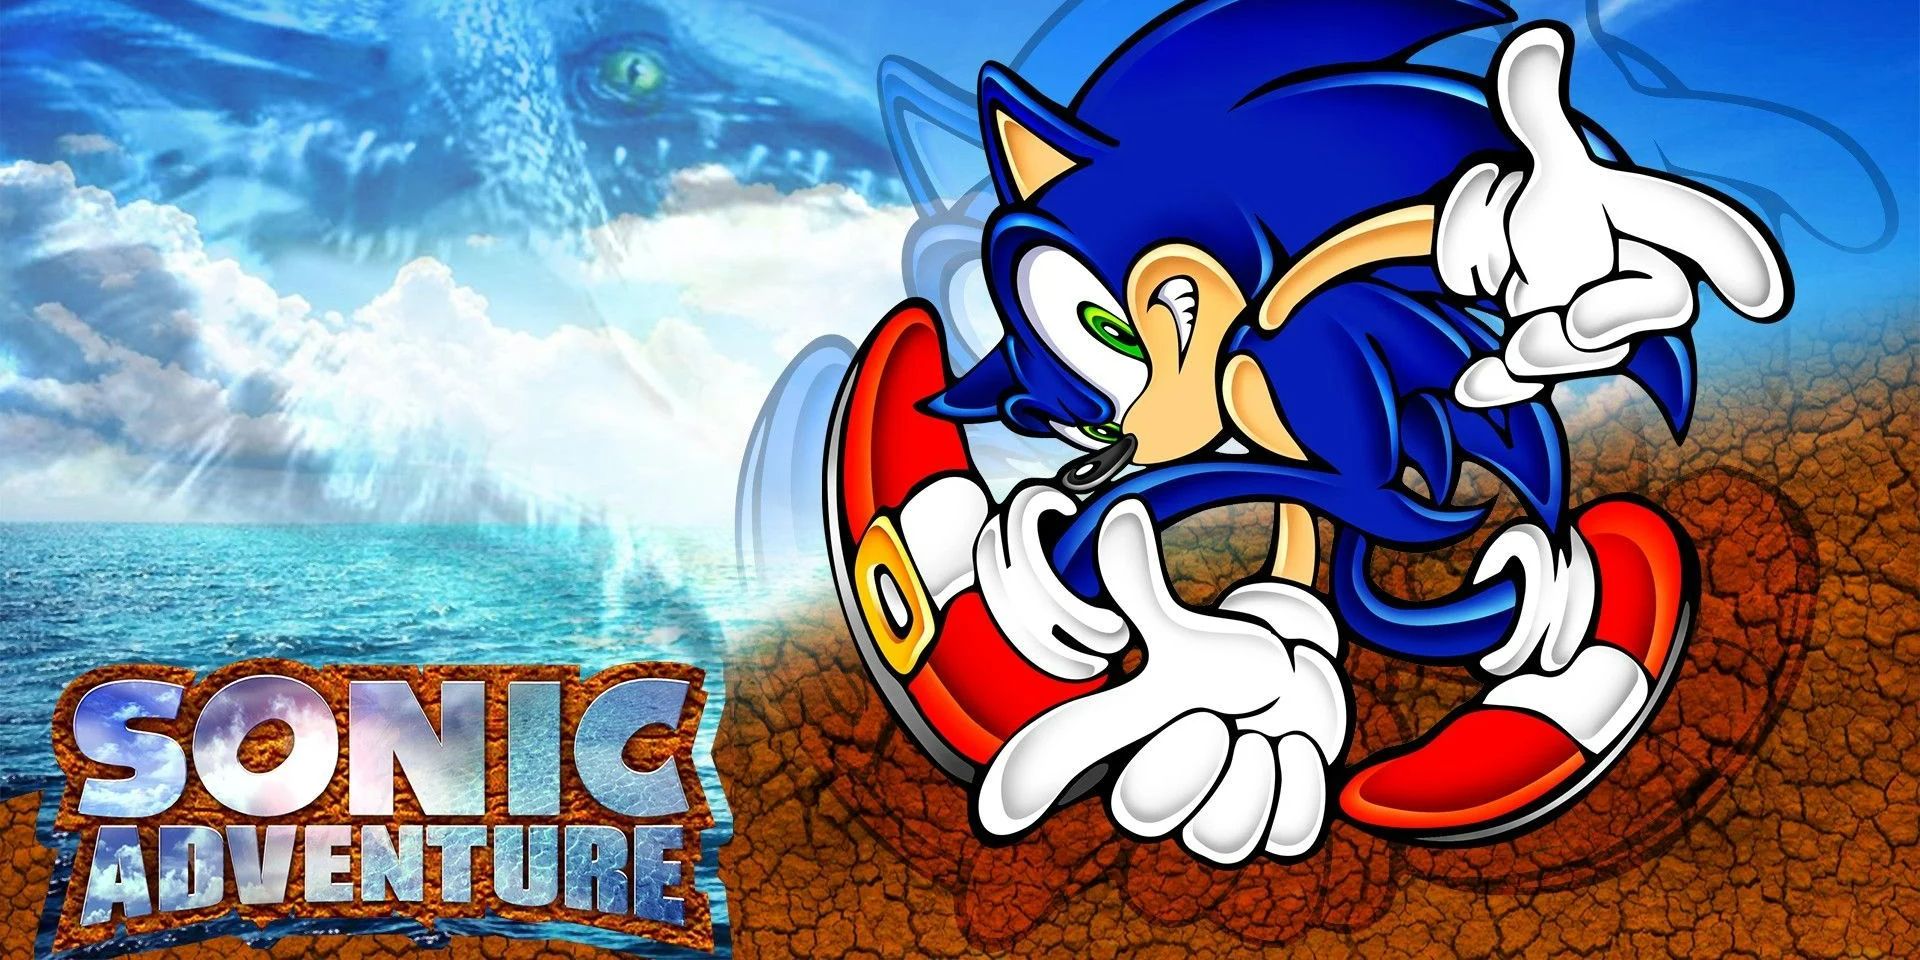 Sonic Adventure wallpaper with Sonic and Chaos